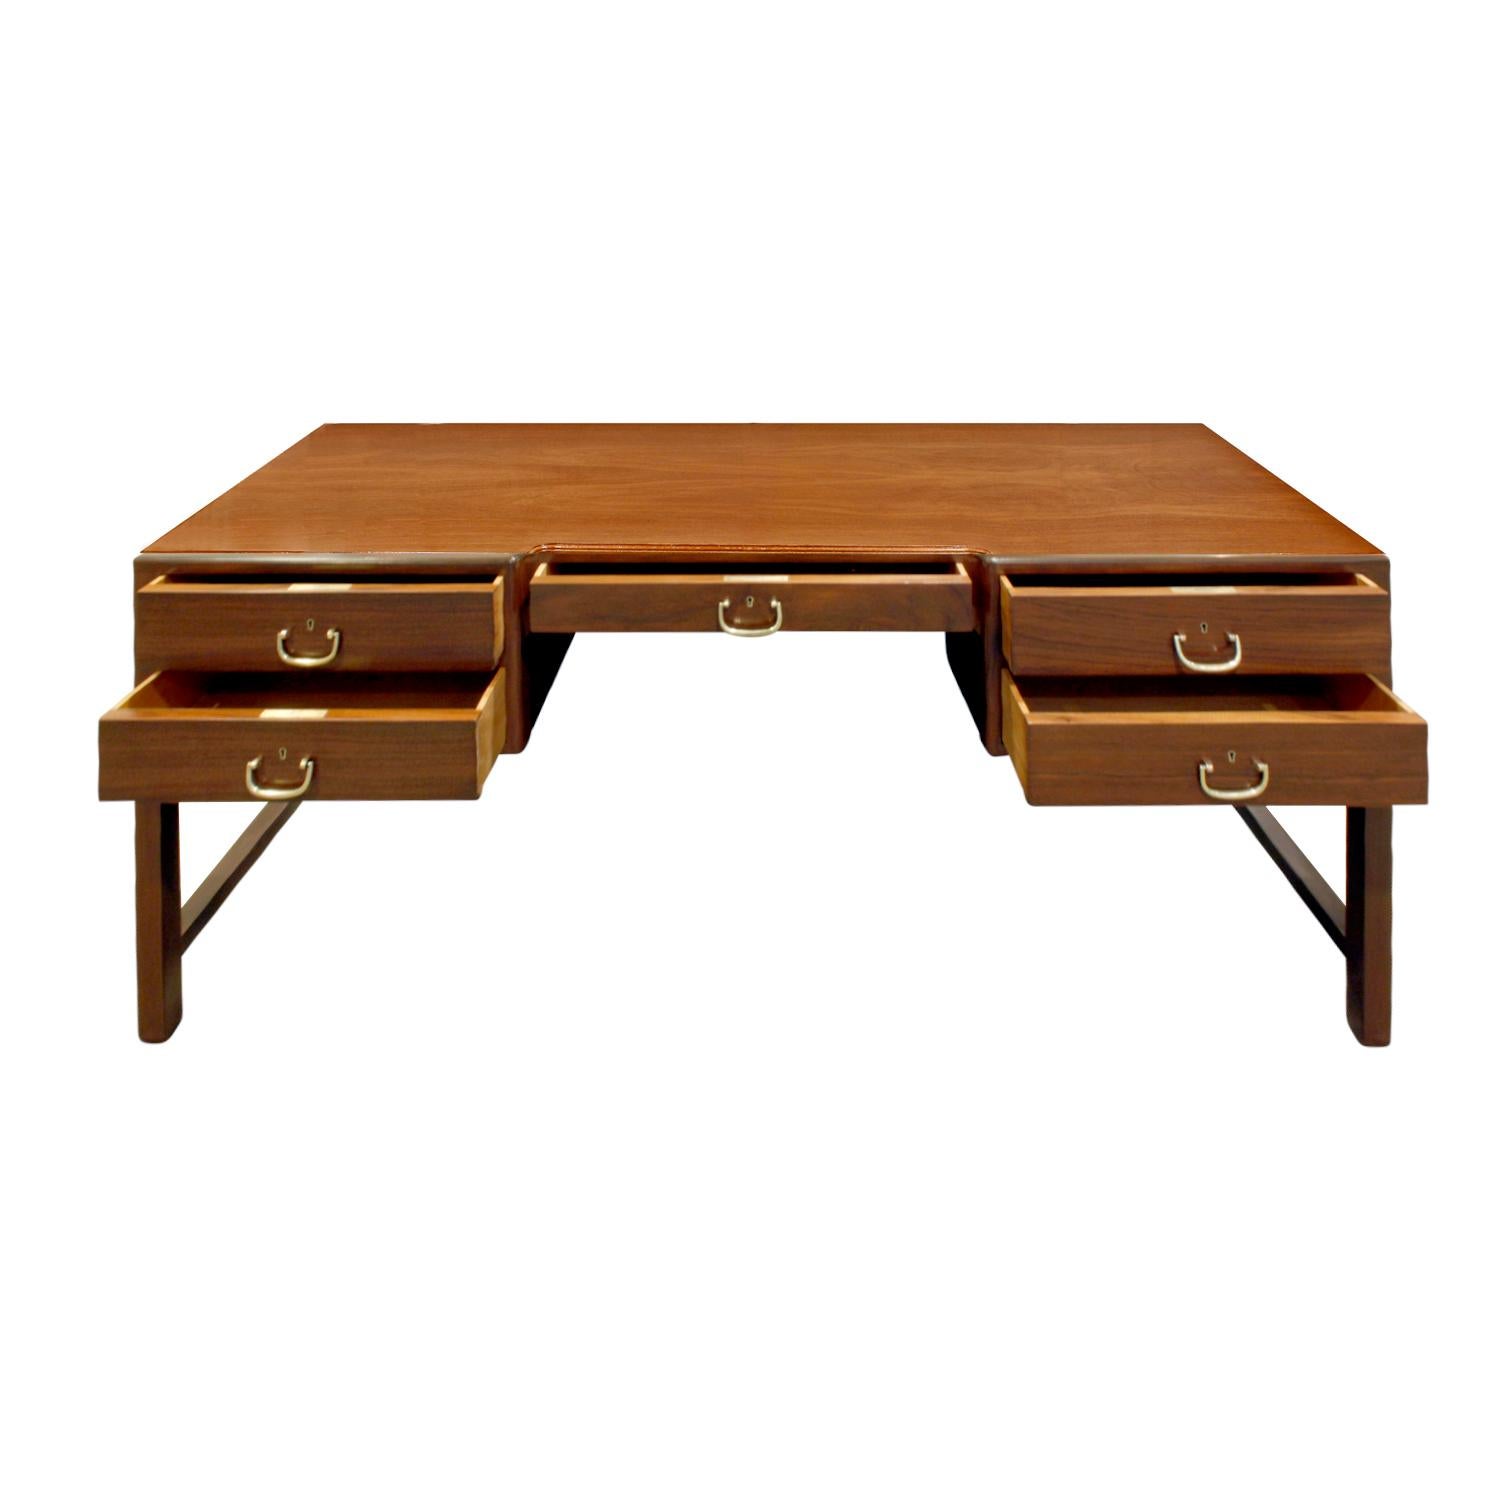 Hand-Crafted Elegant Desk in Teak with Brass Pulls, 1950s